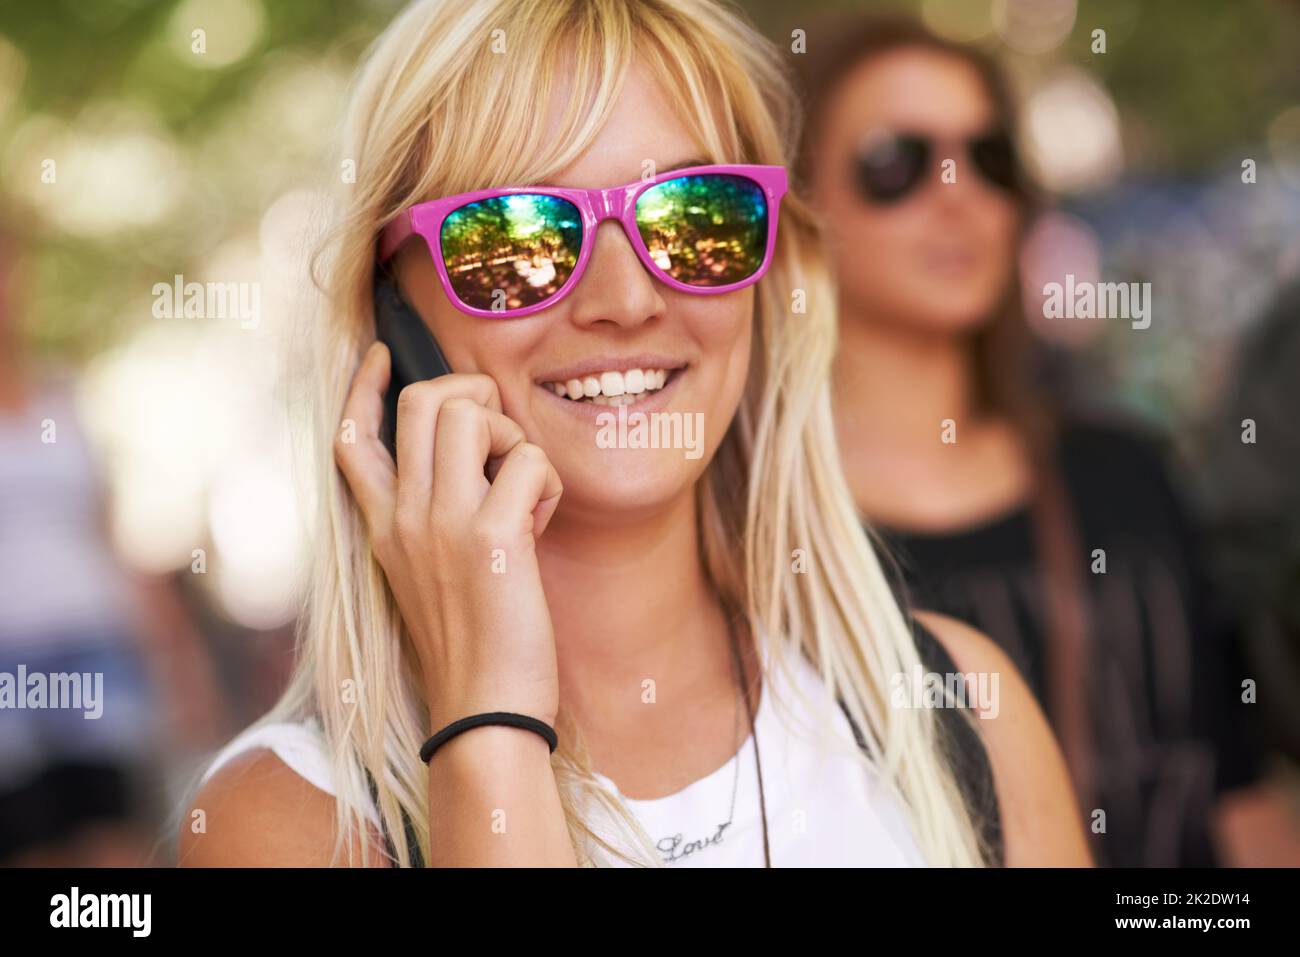 Trying to connect with friends at the festival. Shot of a young woman talking on a cellphone at an outdoor festival. Stock Photo